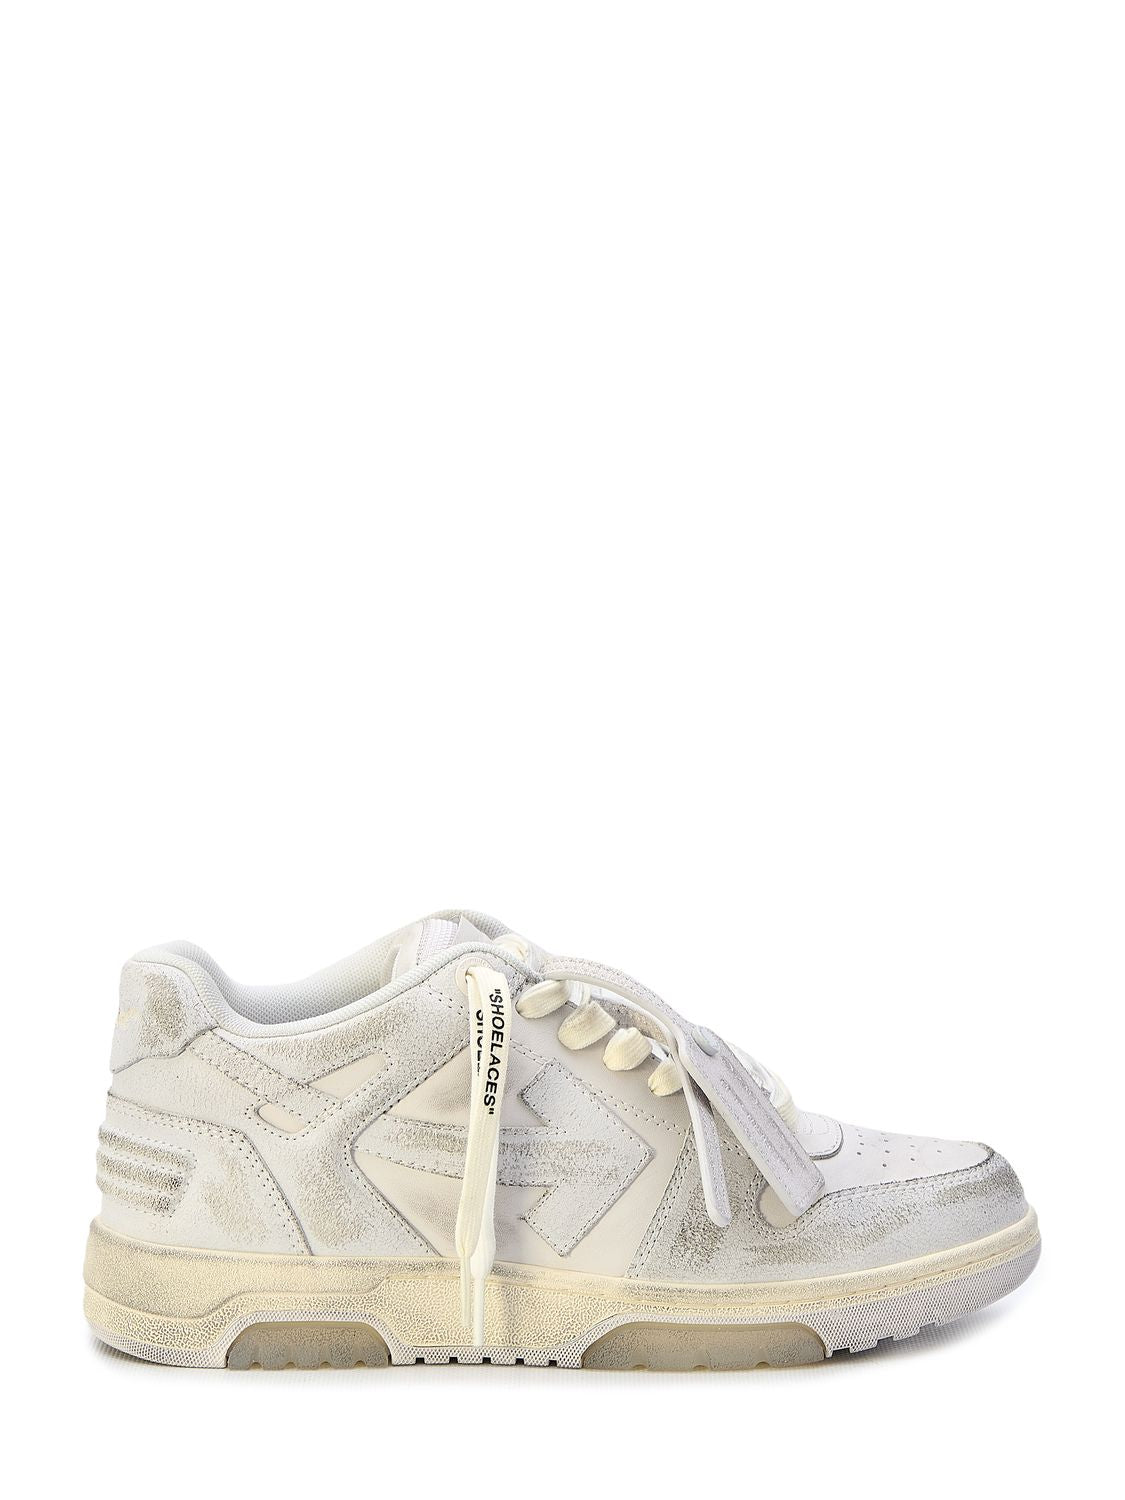 OFF-WHITE Vintage Light Grey Leather Sneakers for Men